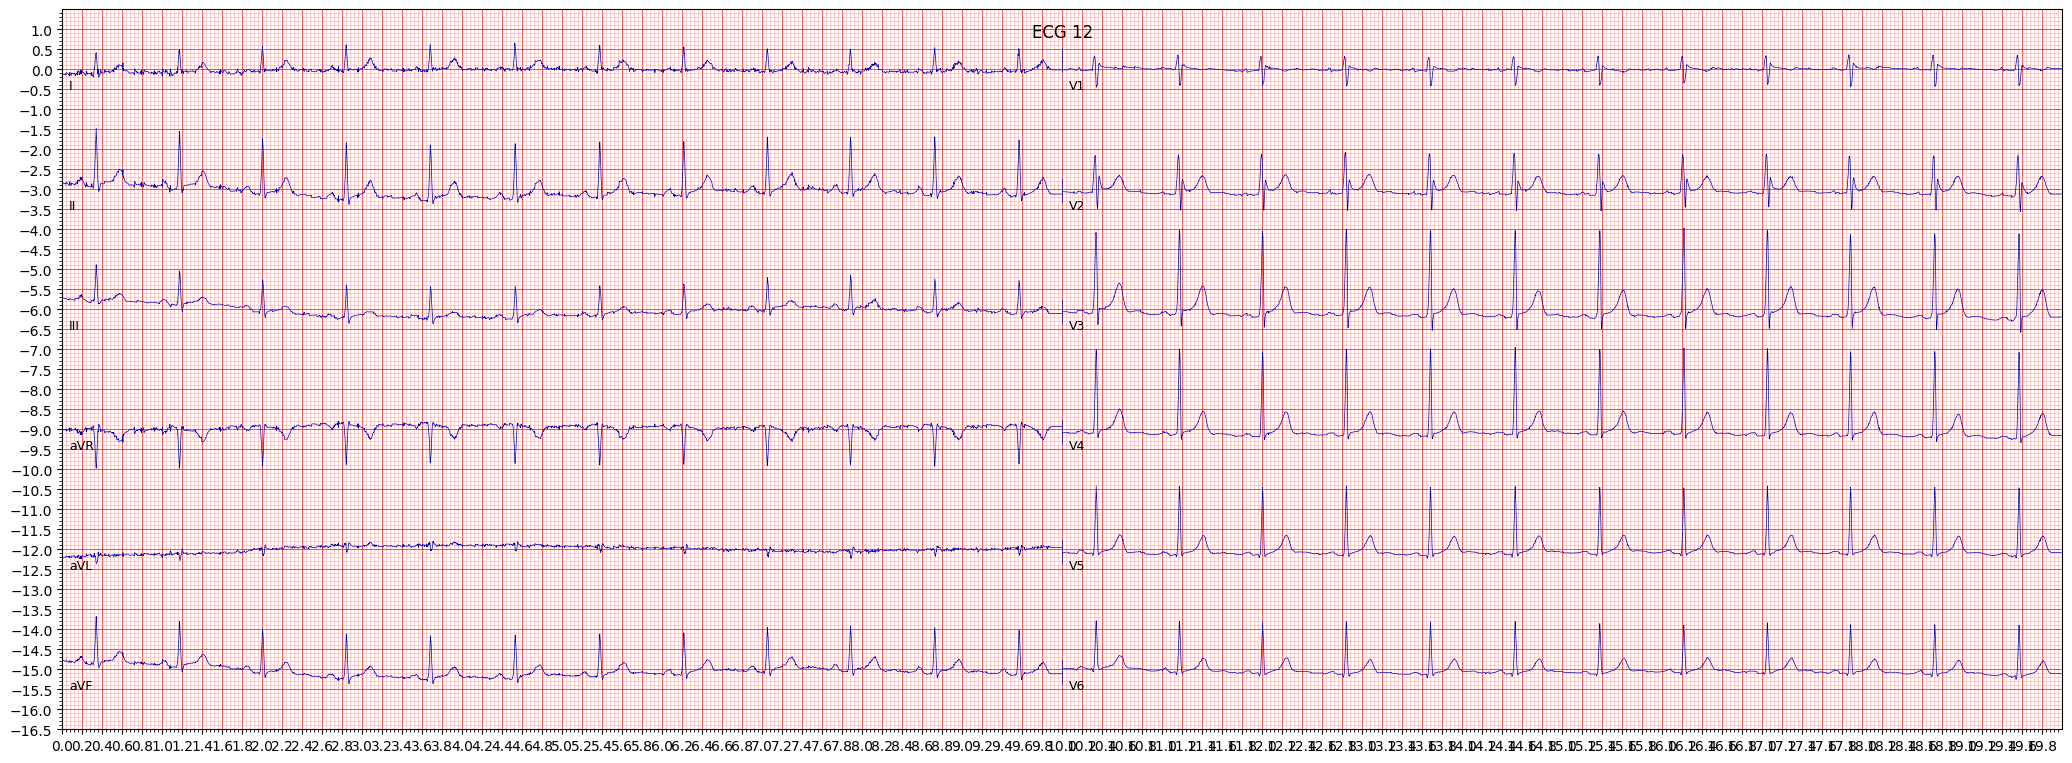 incomplete right bundle branch block (IRBBB) example 65